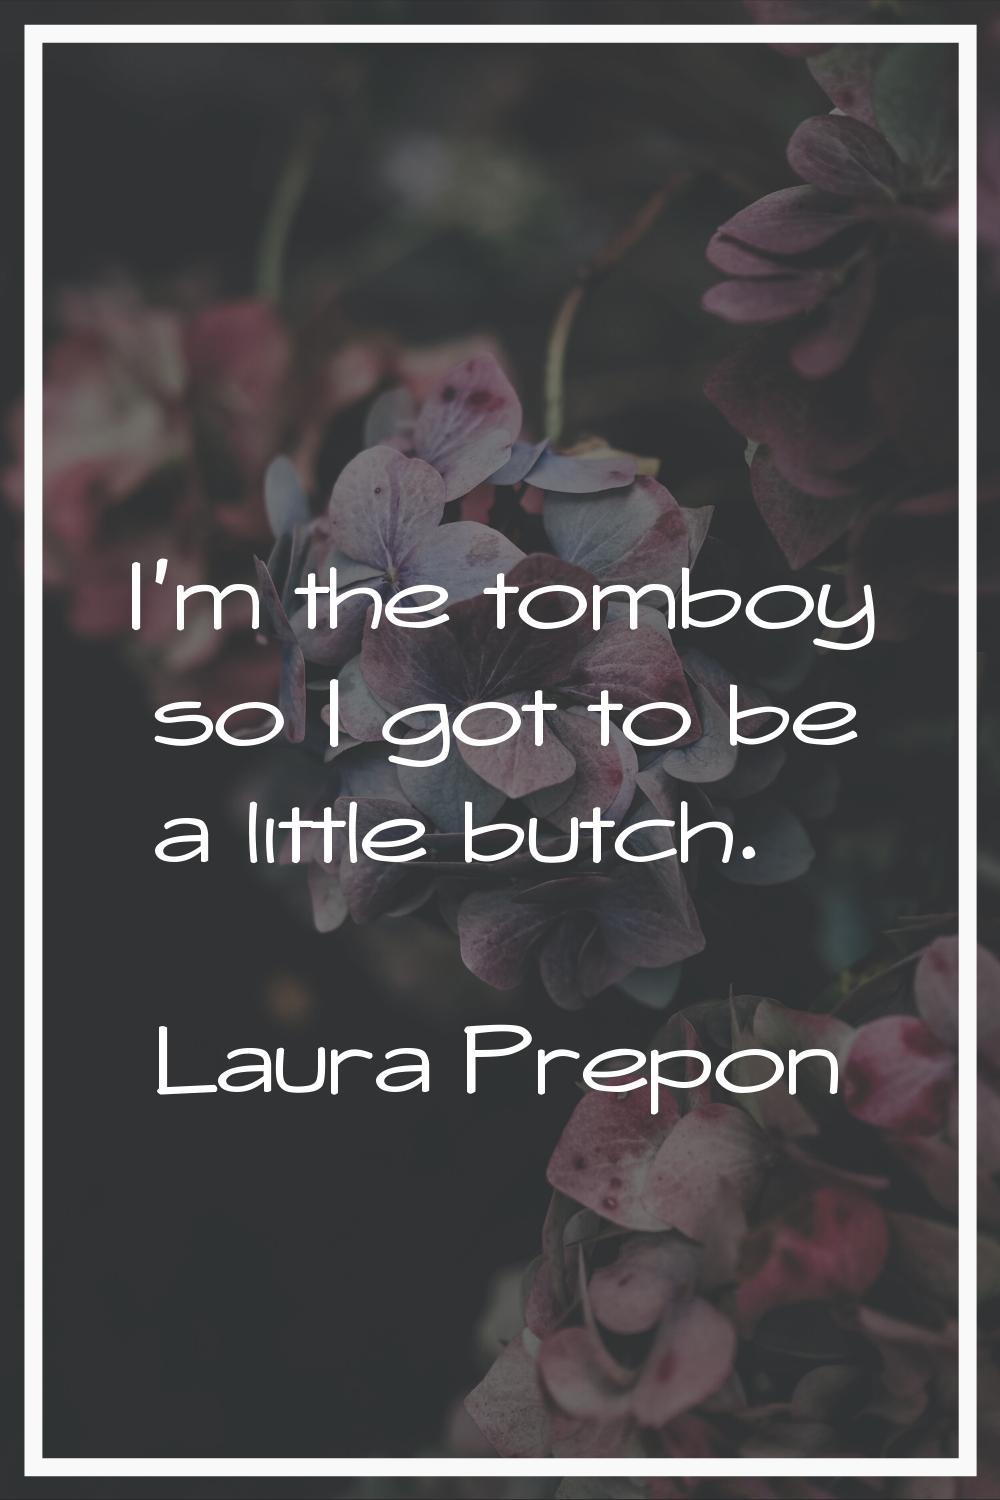 I'm the tomboy so I got to be a little butch.